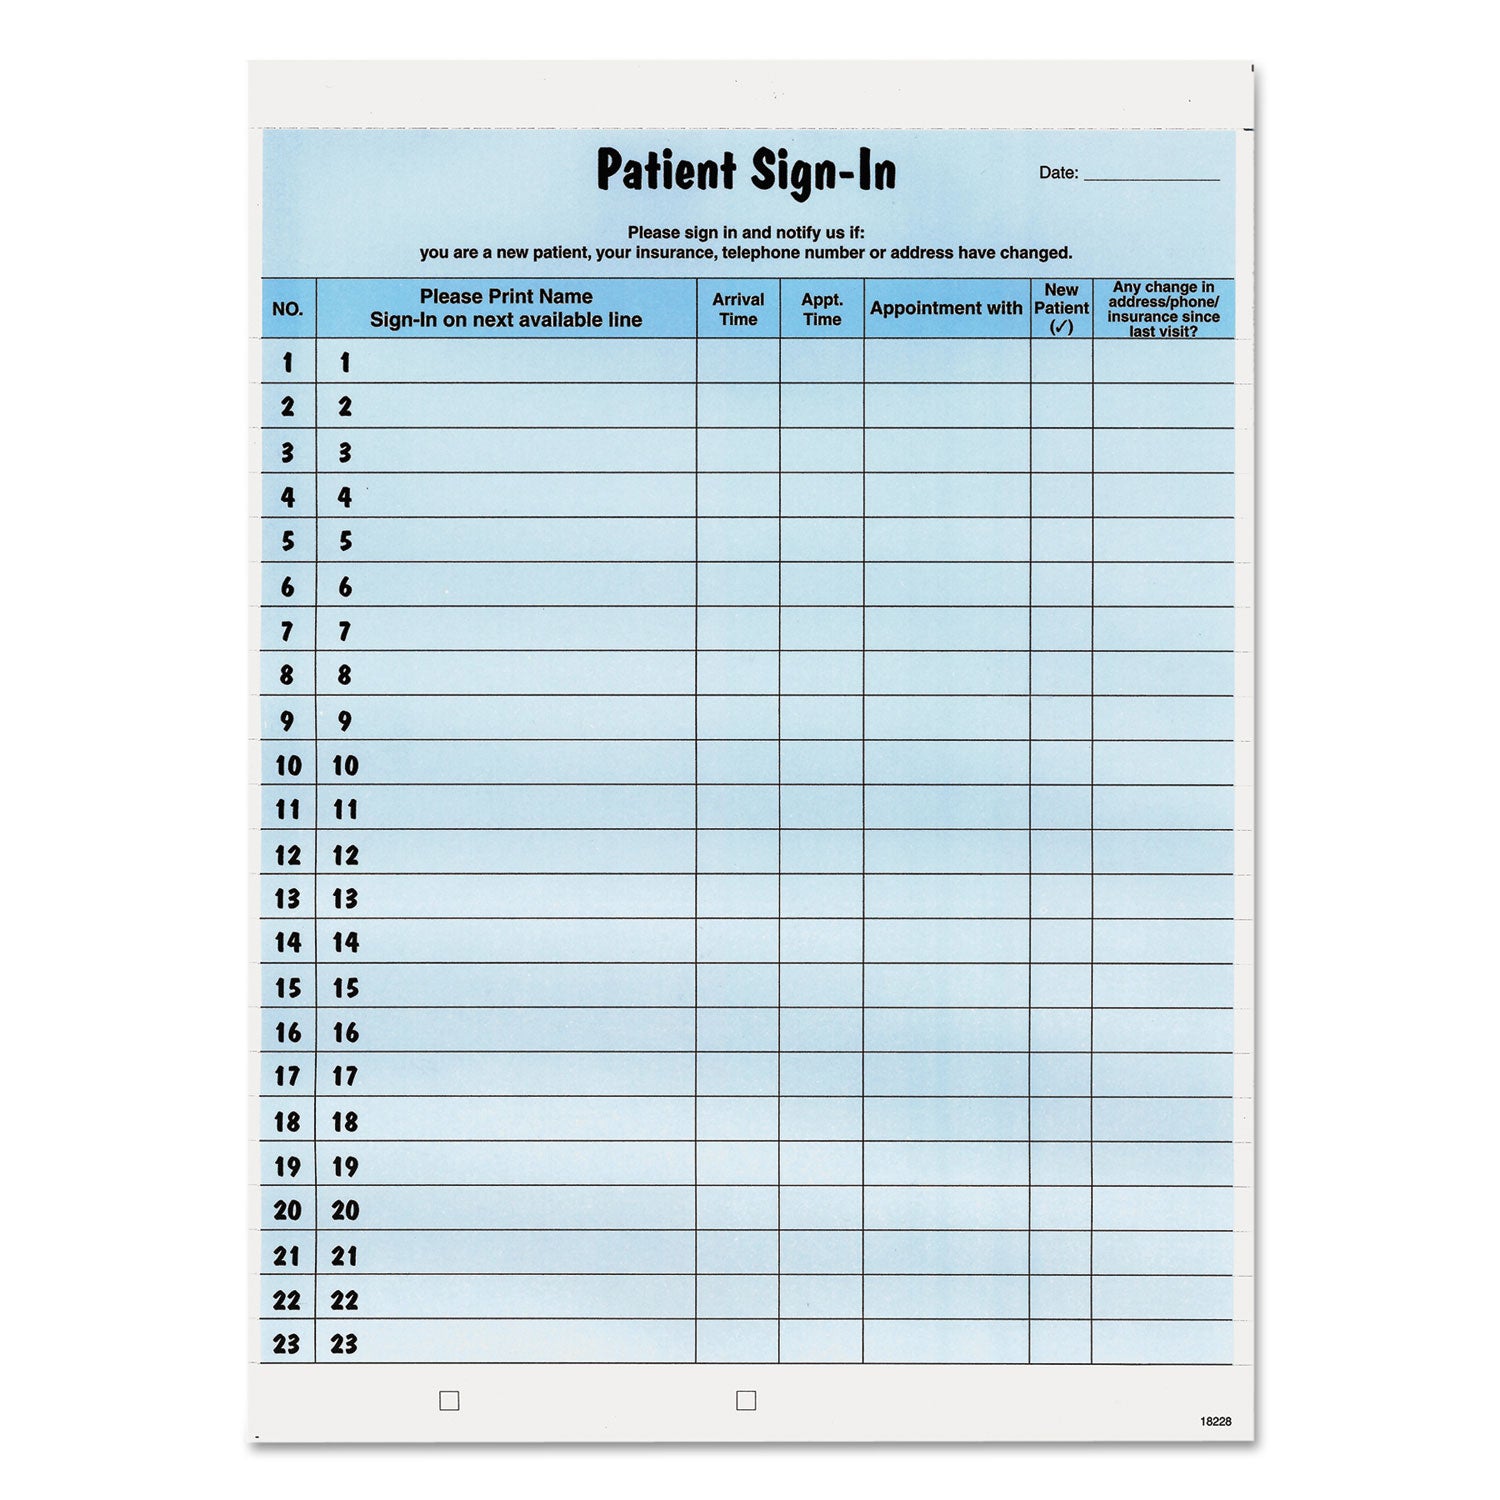 Patient Sign-In Label Forms, Two-Part Carbon, 8.5 x 11.63, Blue Sheets, 125 Forms Total - 